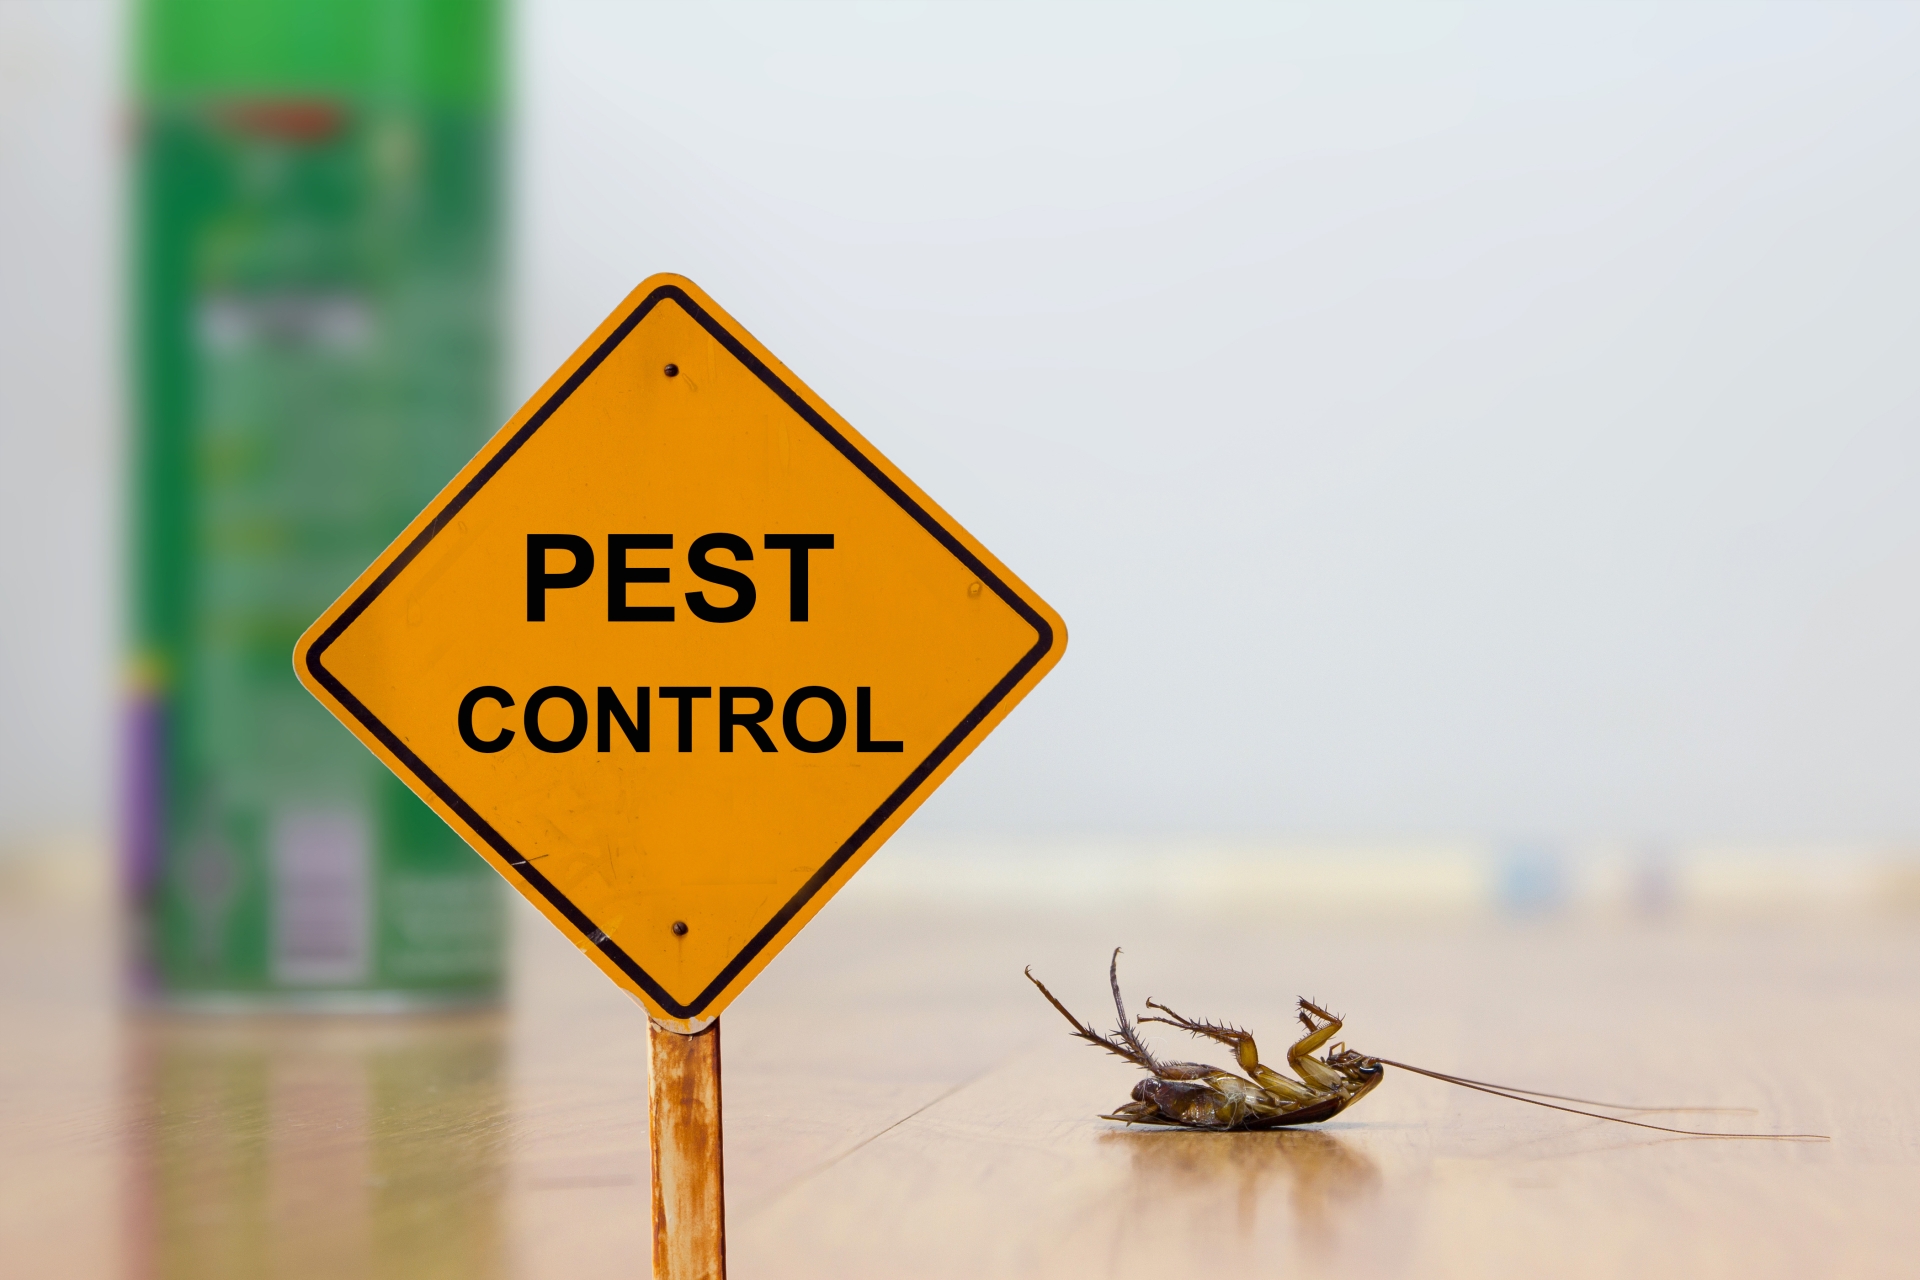 24 Hour Pest Control, Pest Control in Perivale, UB6. Call Now 020 8166 9746